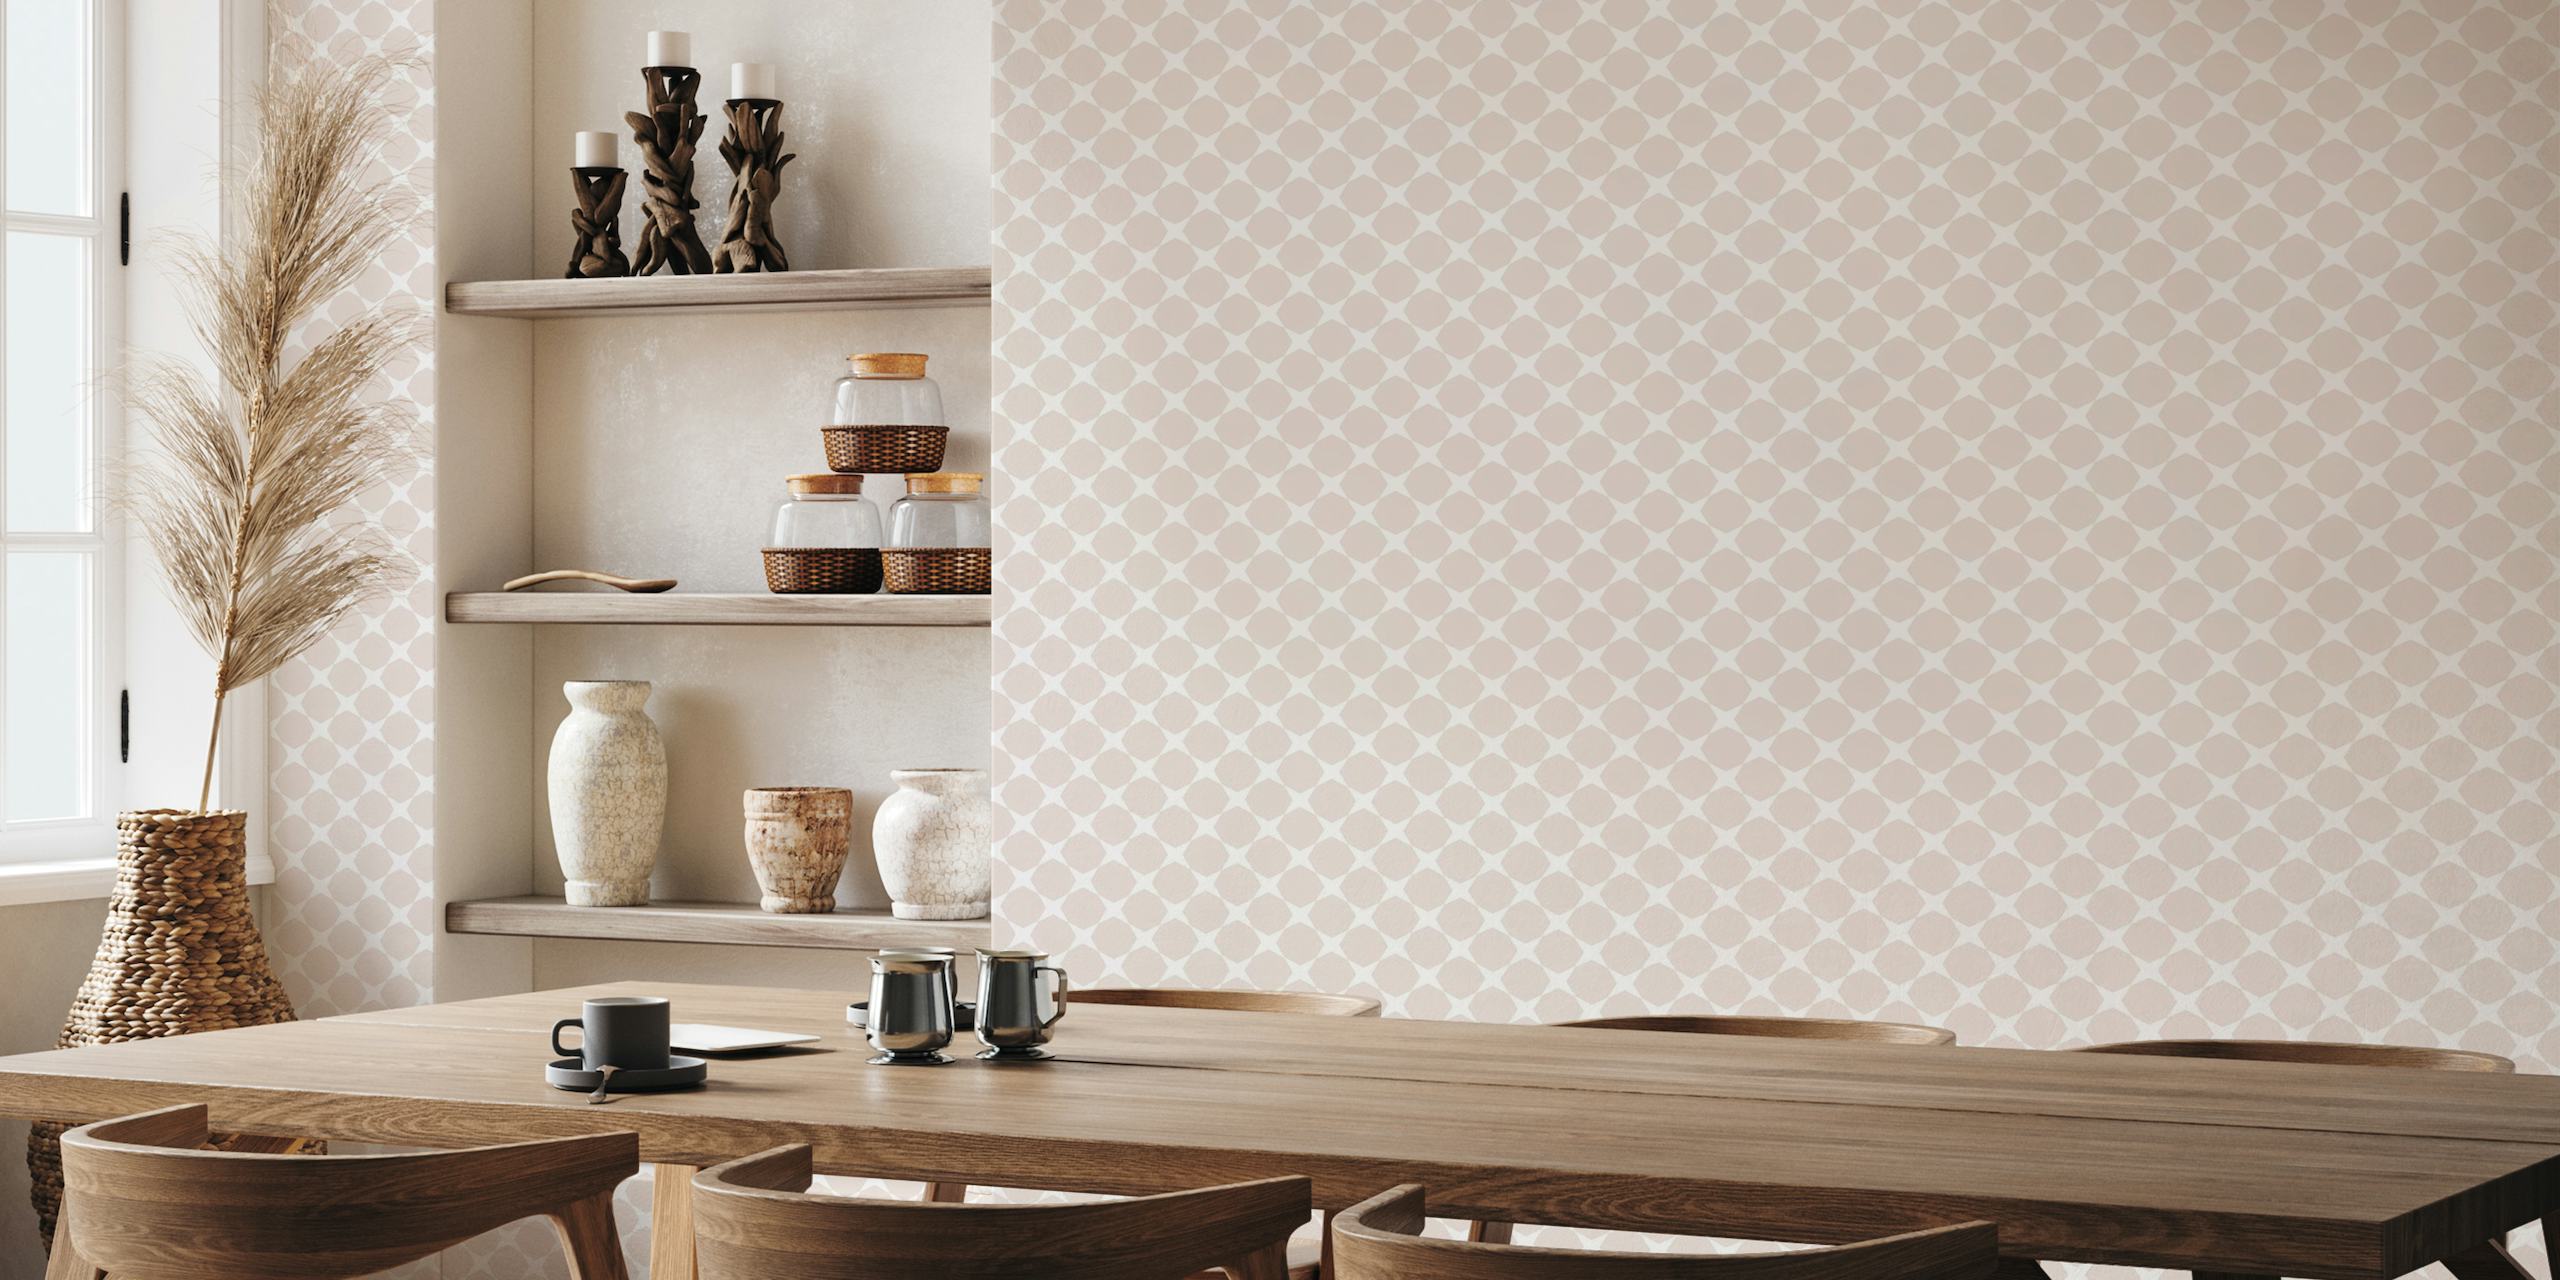 Geometric patterned wall mural Tessellation Treasures in soft blush tones